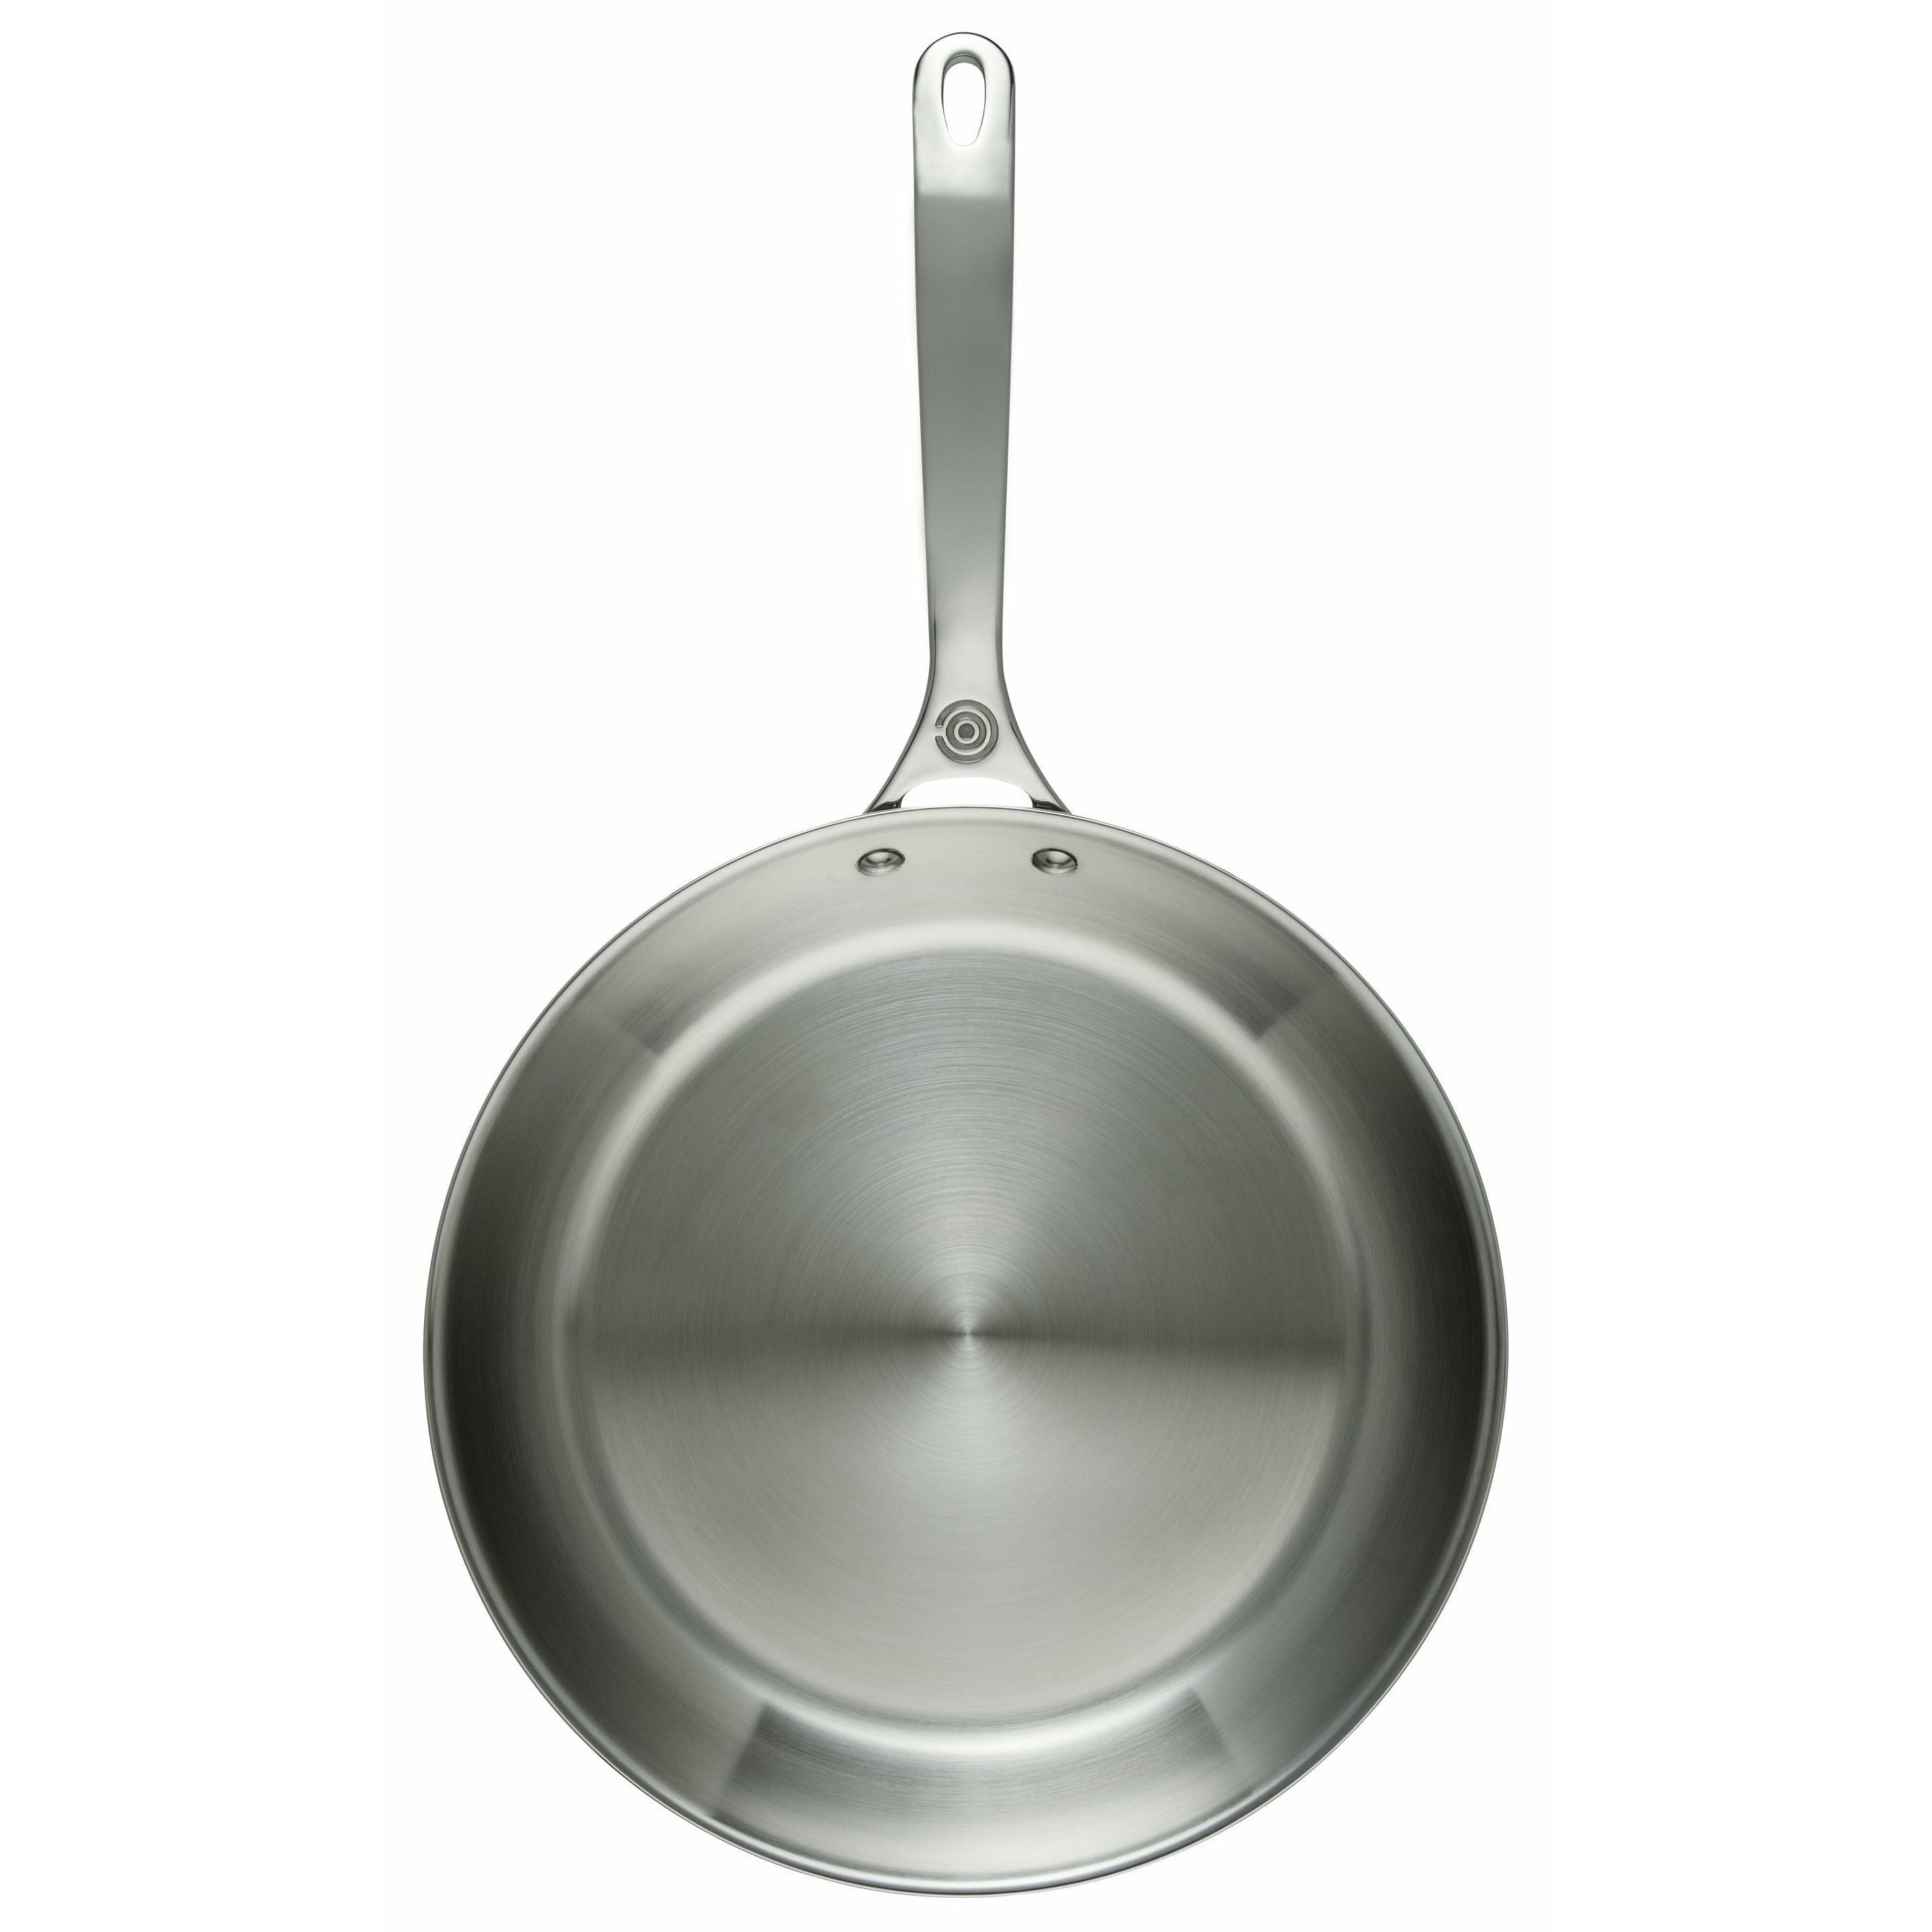 Le Creuset Signature Stainless Steel Uncoated Frying Pan, 26 Cm